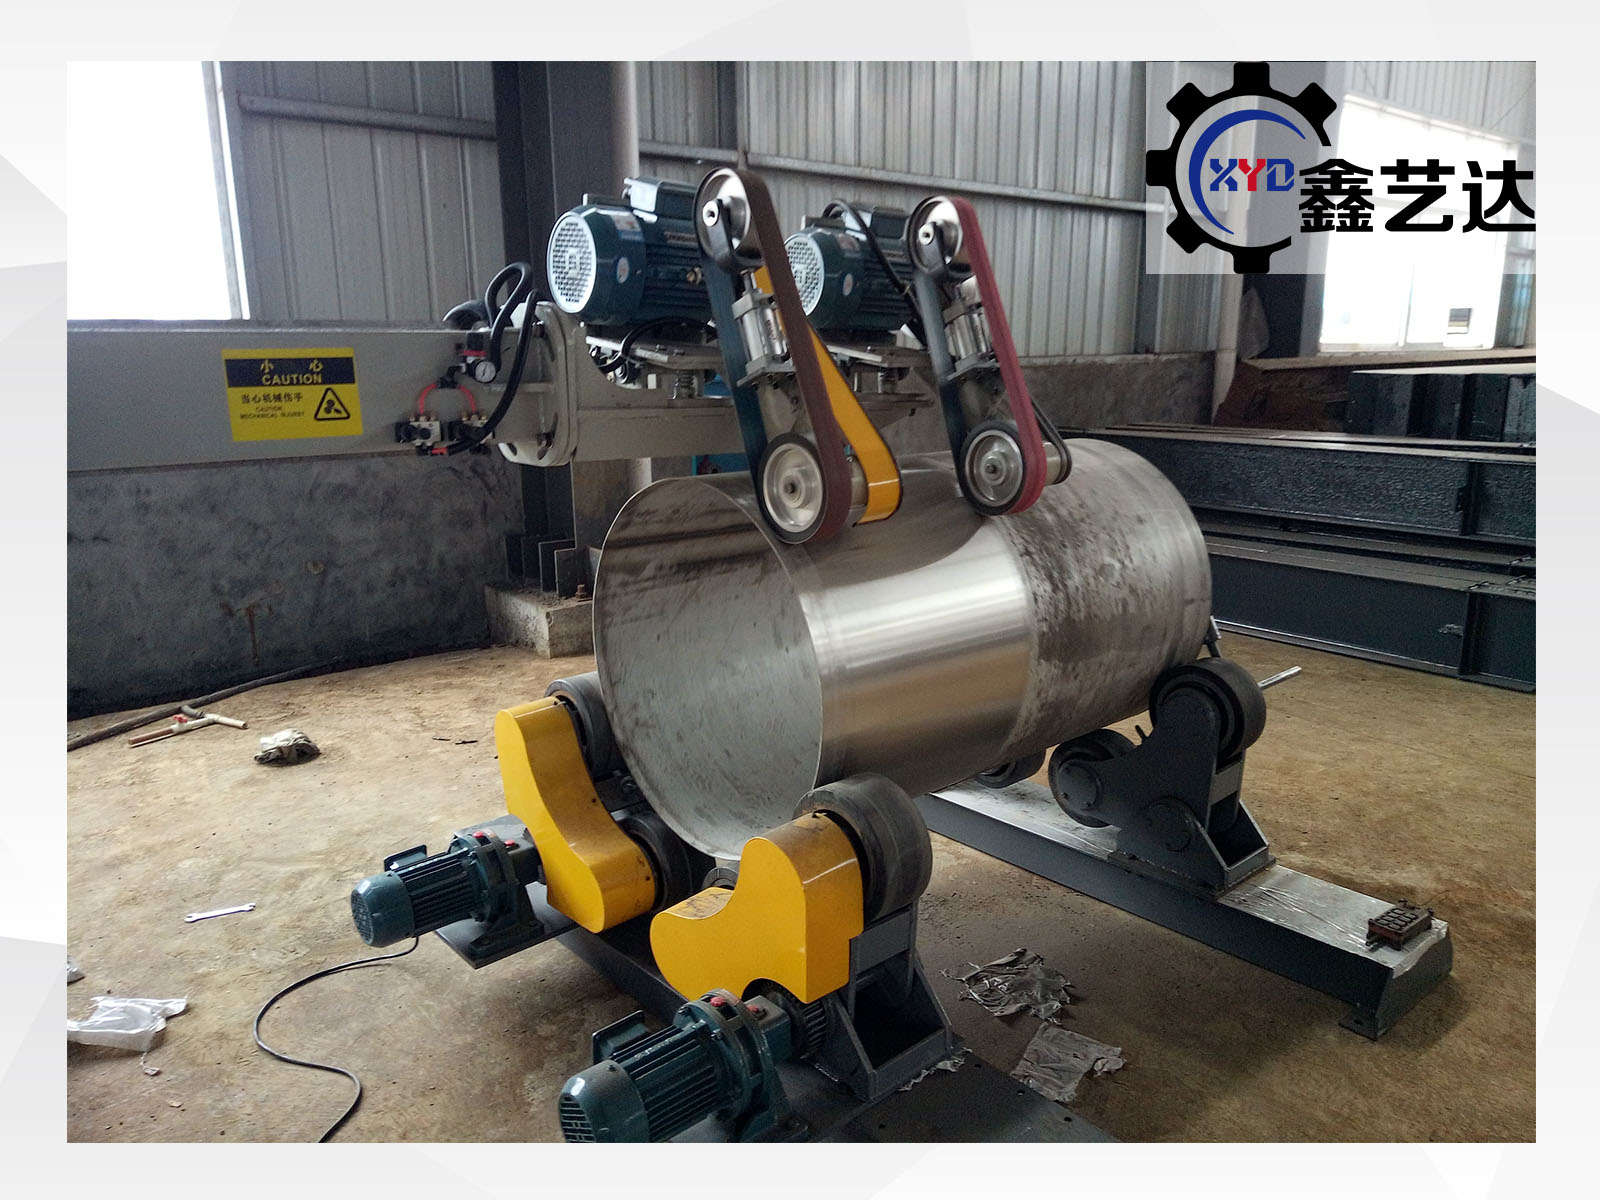 Tank polishing machine operating instruction has been uploaded to the service support section